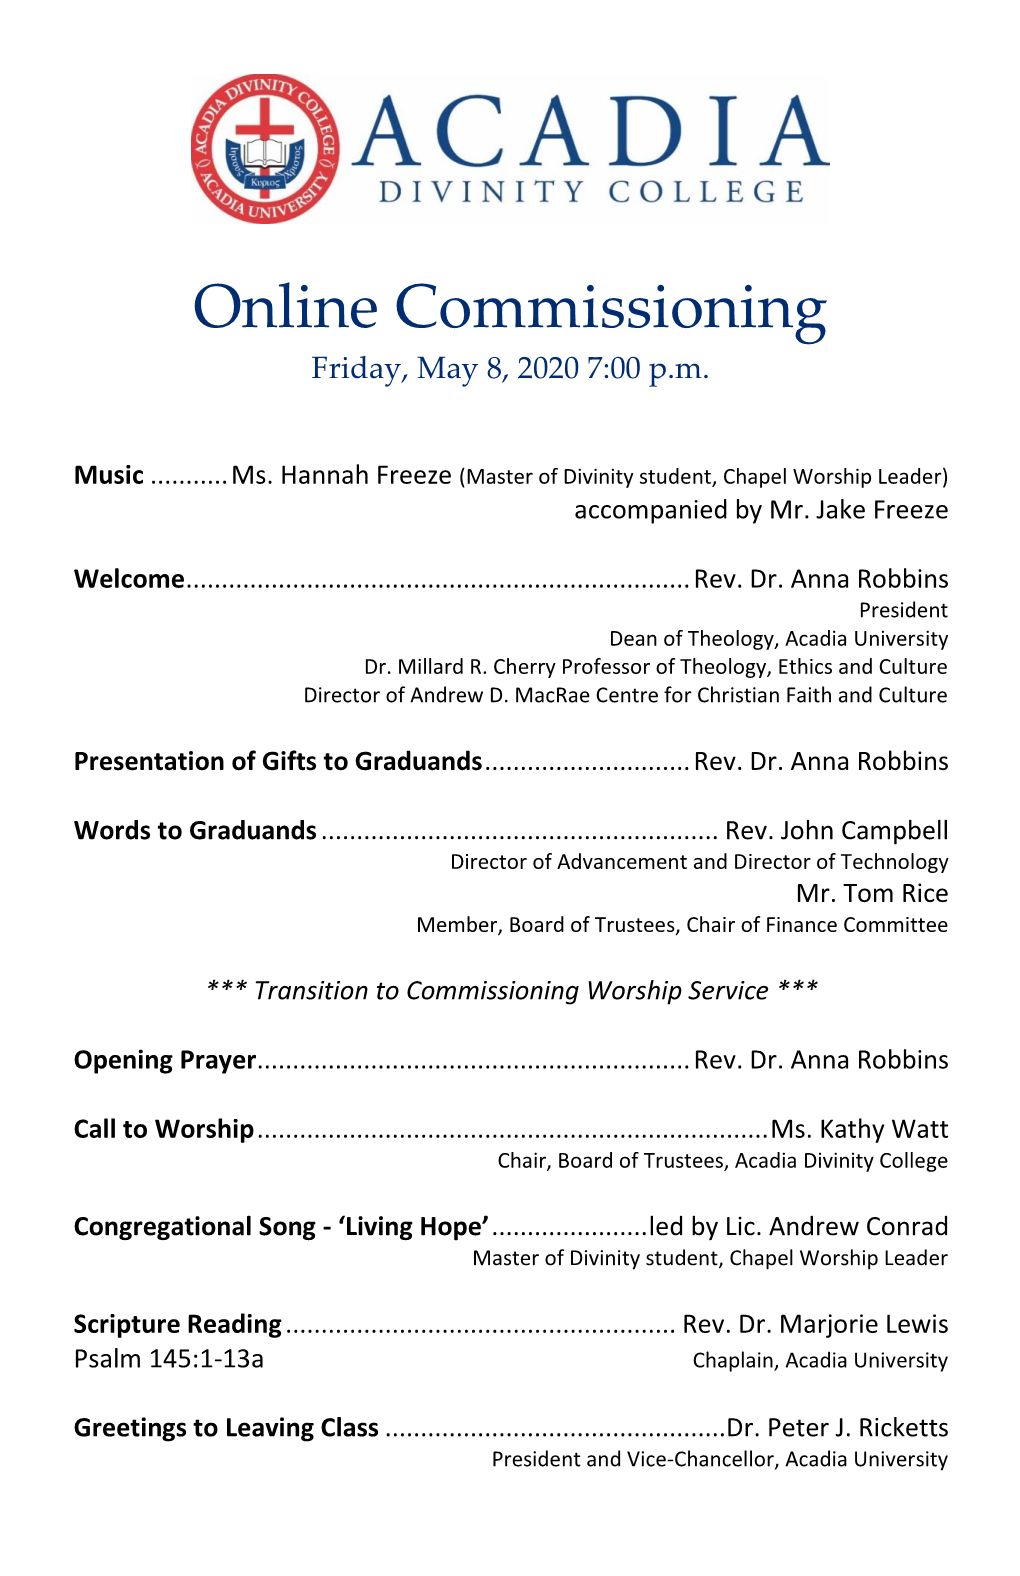 Online Commissioning Friday, May 8, 2020 7:00 P.M